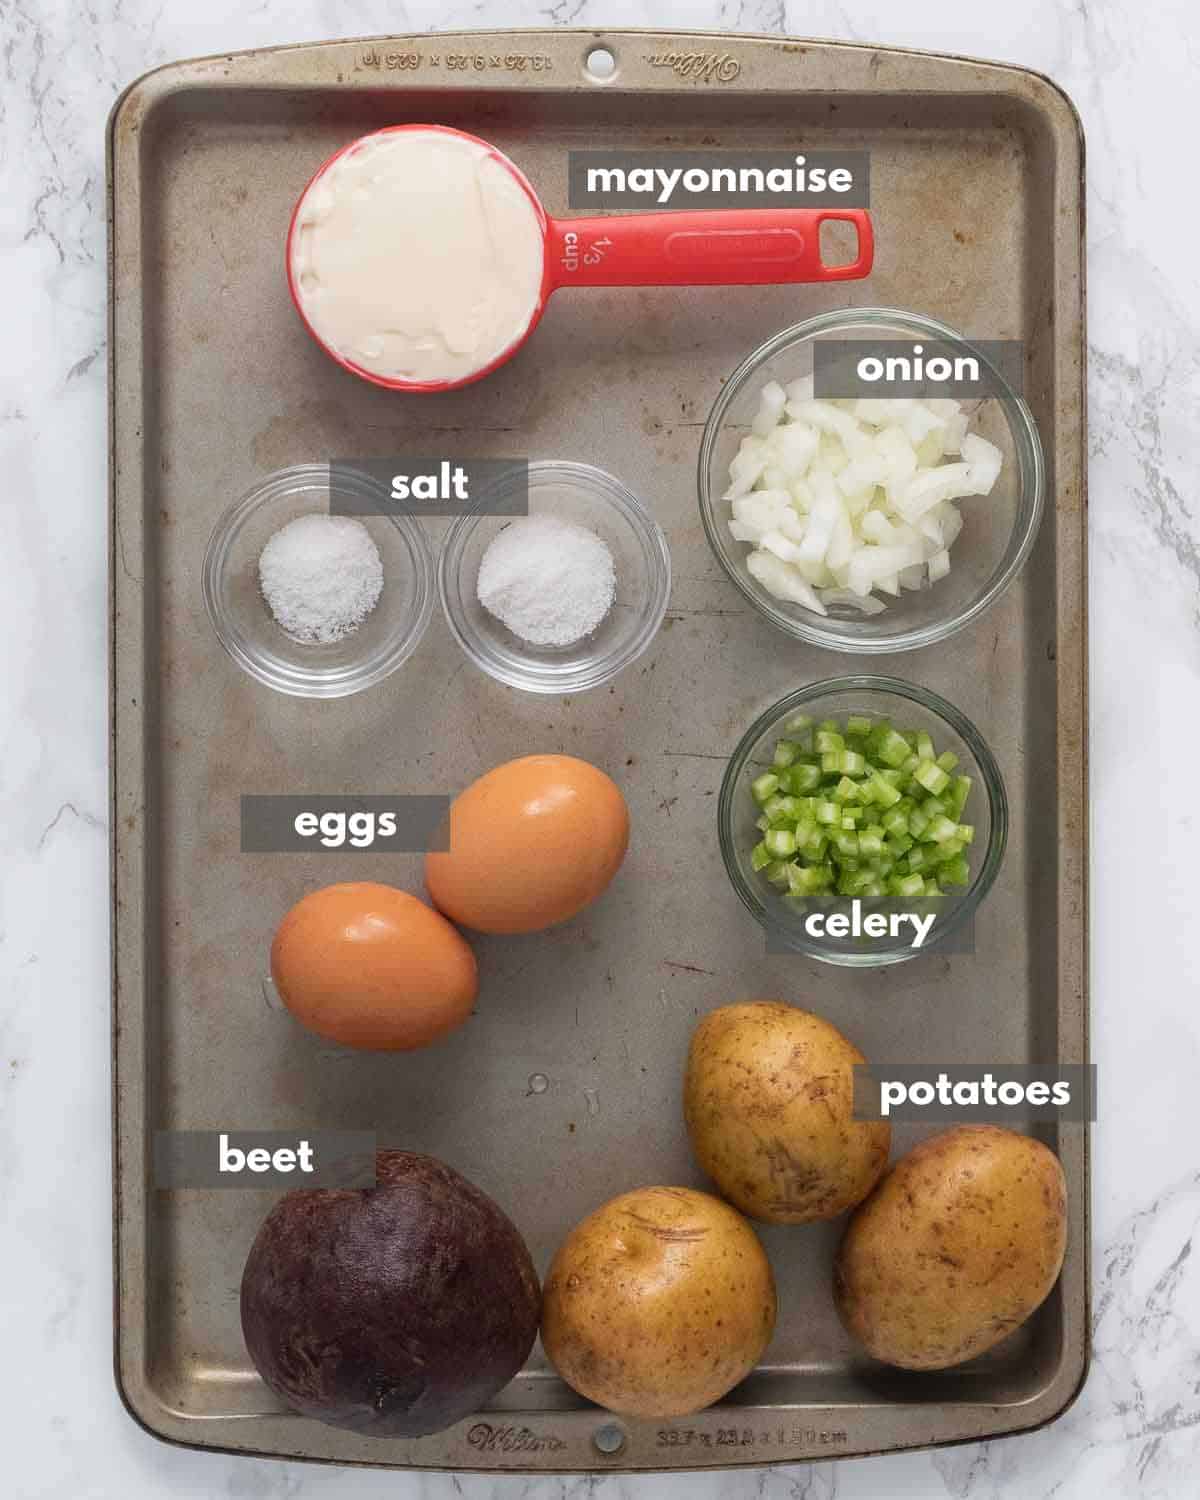 A top view of a ingredients portioned for making potato and beets salad.